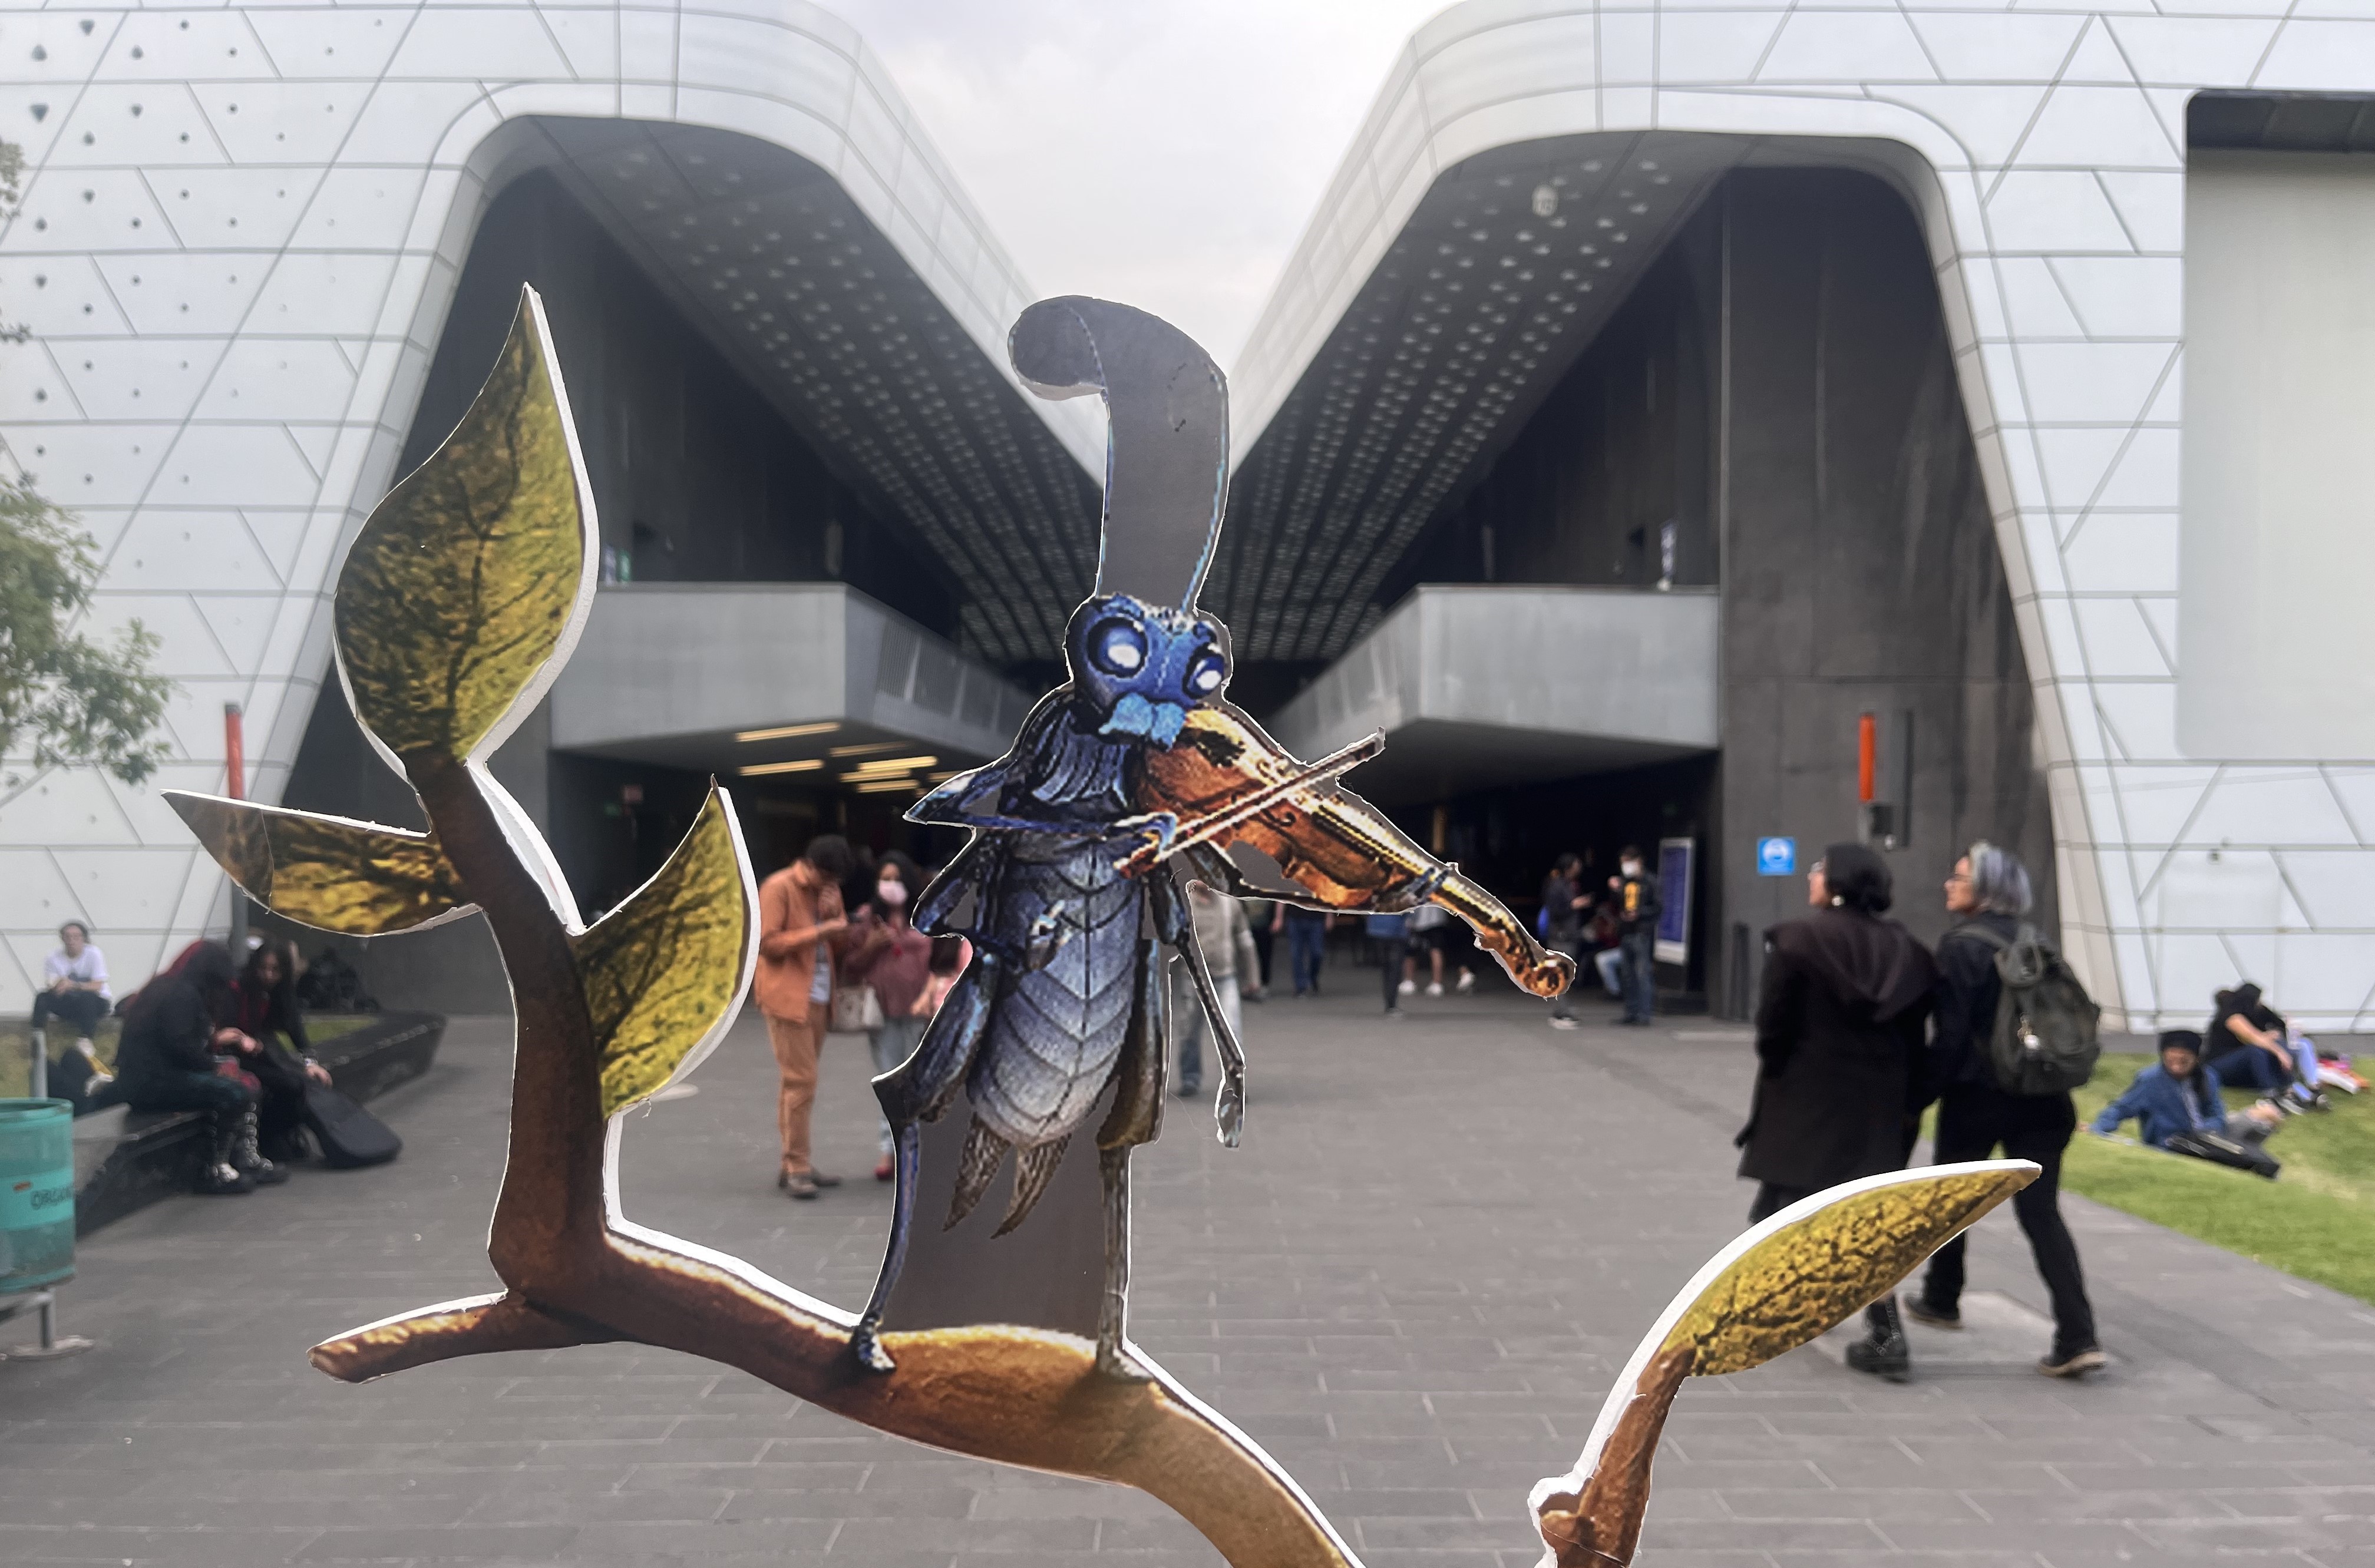 A board pop-up of Sebastian J. Cricket welcomes audience members eager to see 'Guillermo del Toro's Pinocchio' at the Cineteca Nacional in Mexico City. (Photo by Steven Salido Fisher)